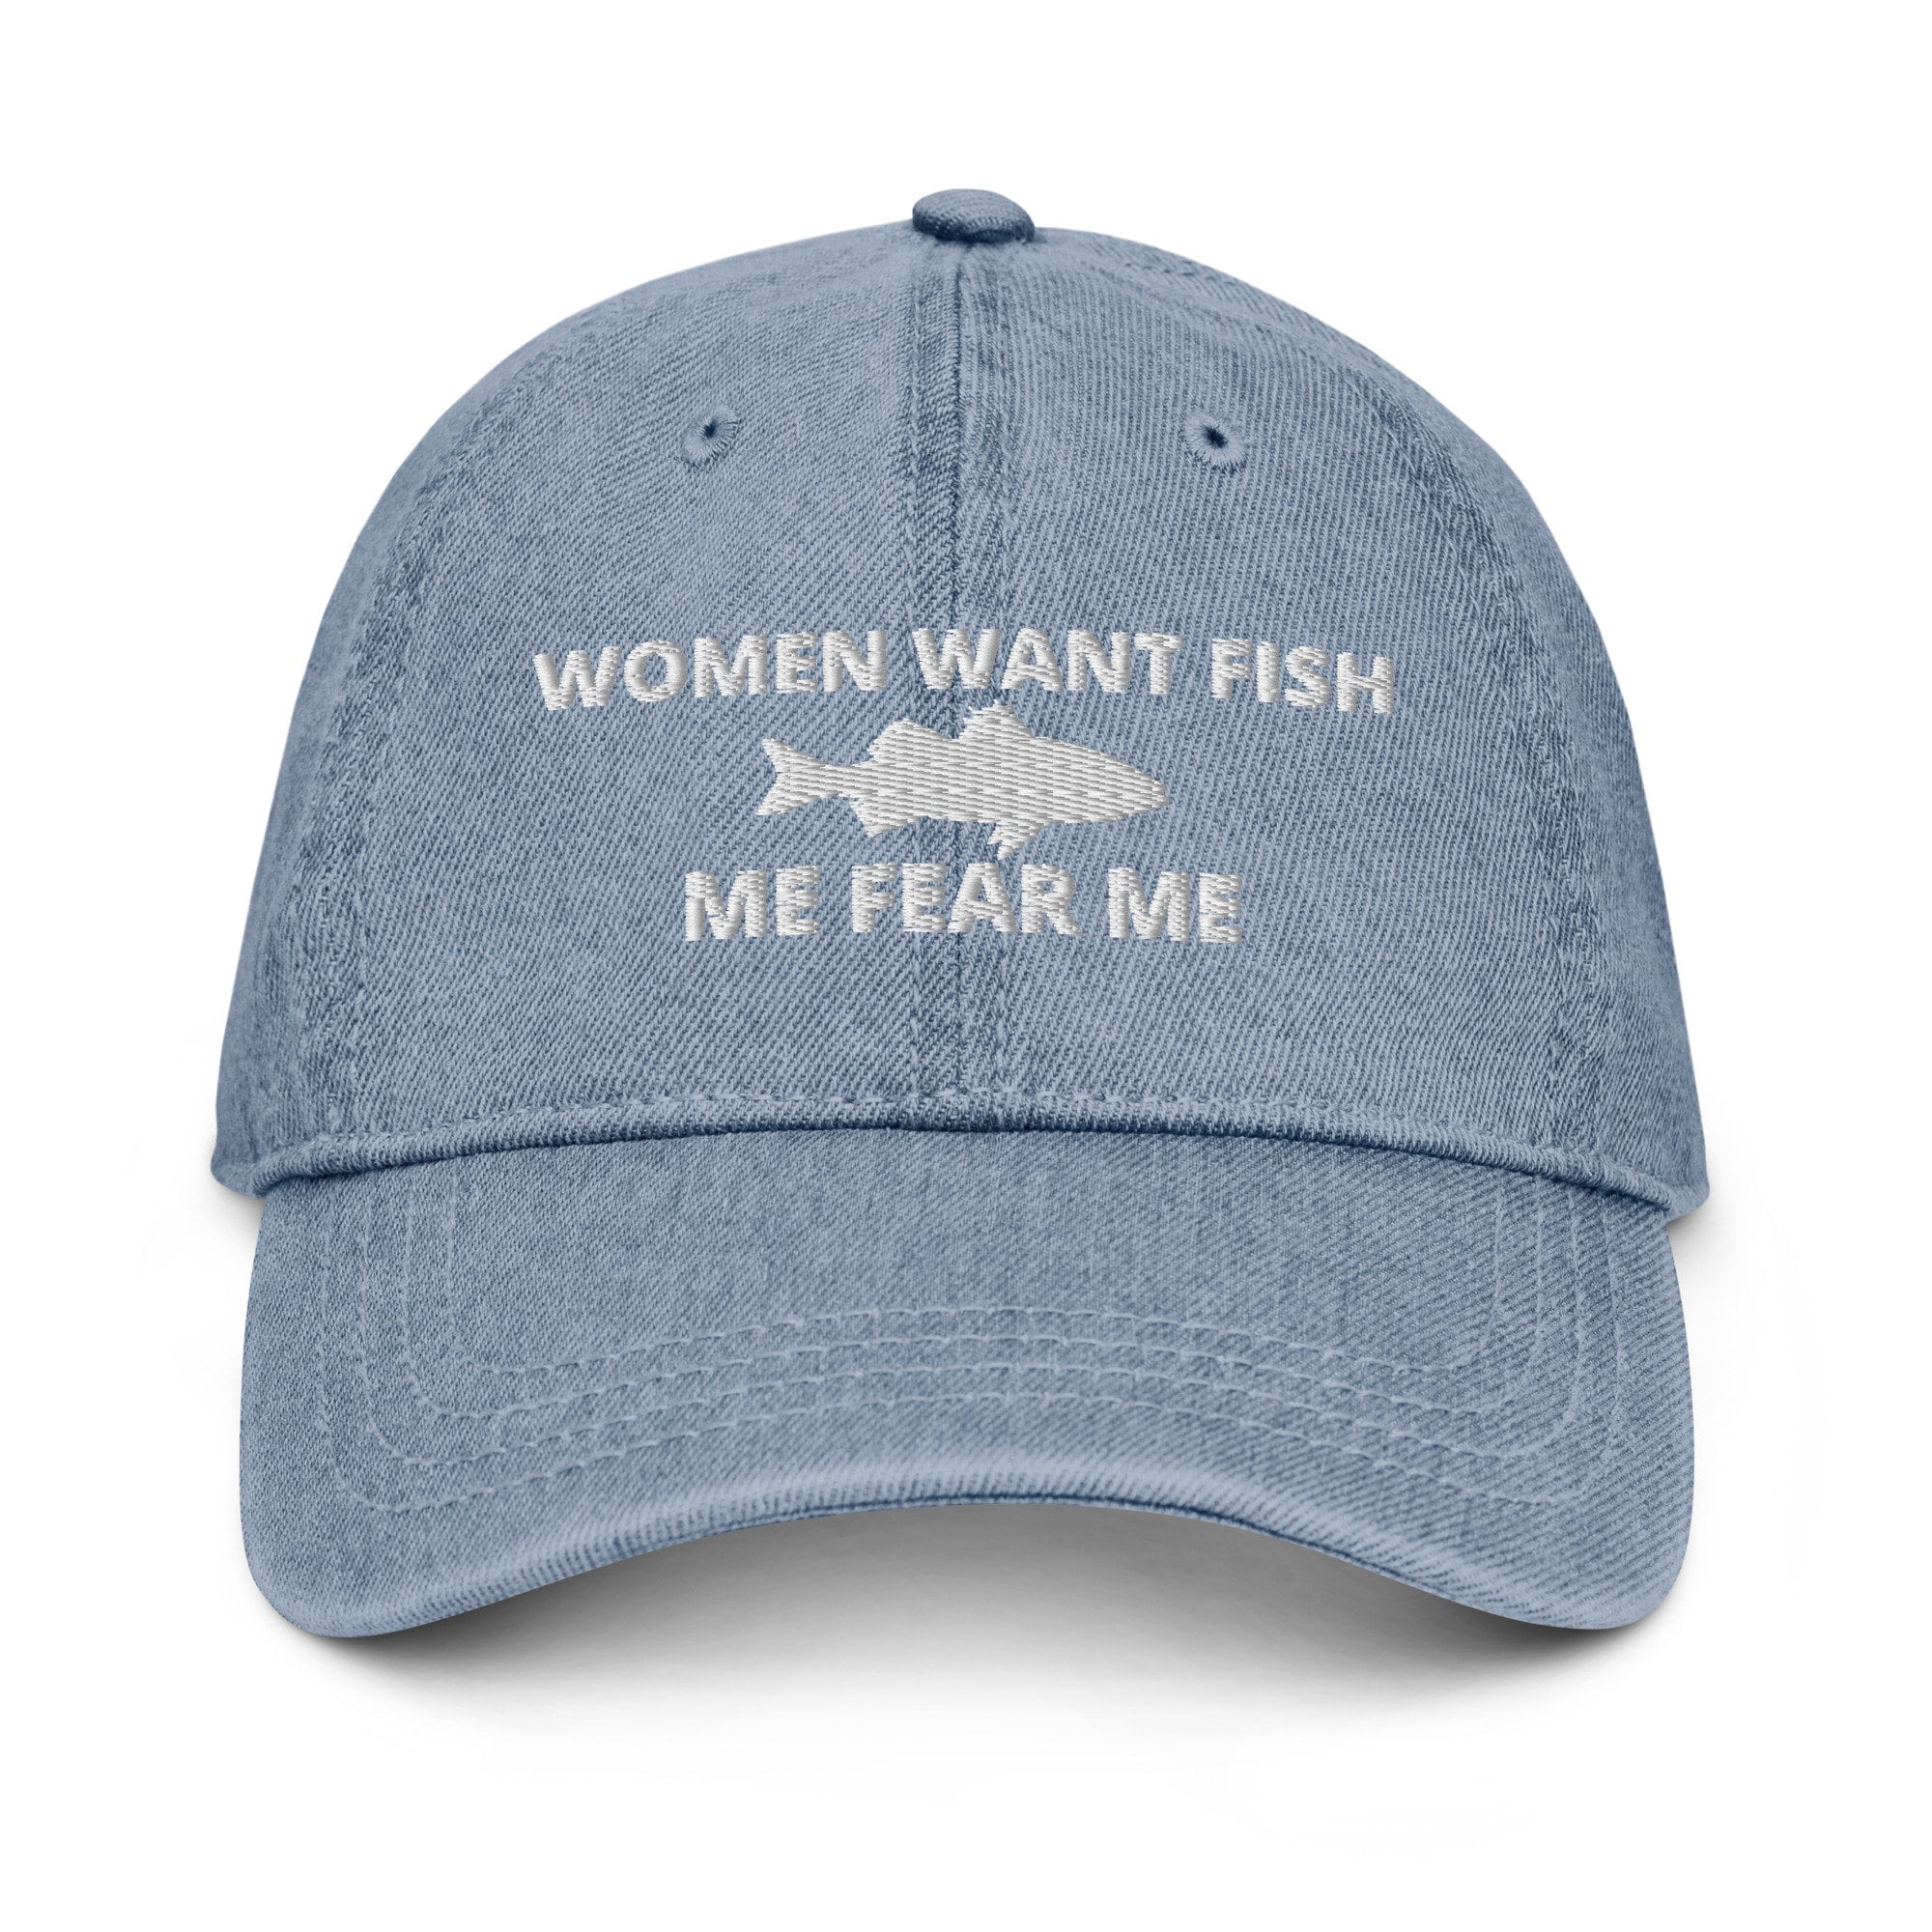 Women Want Fish, Me Fear Me, Embroidered Denim Hat Cap -  Canada